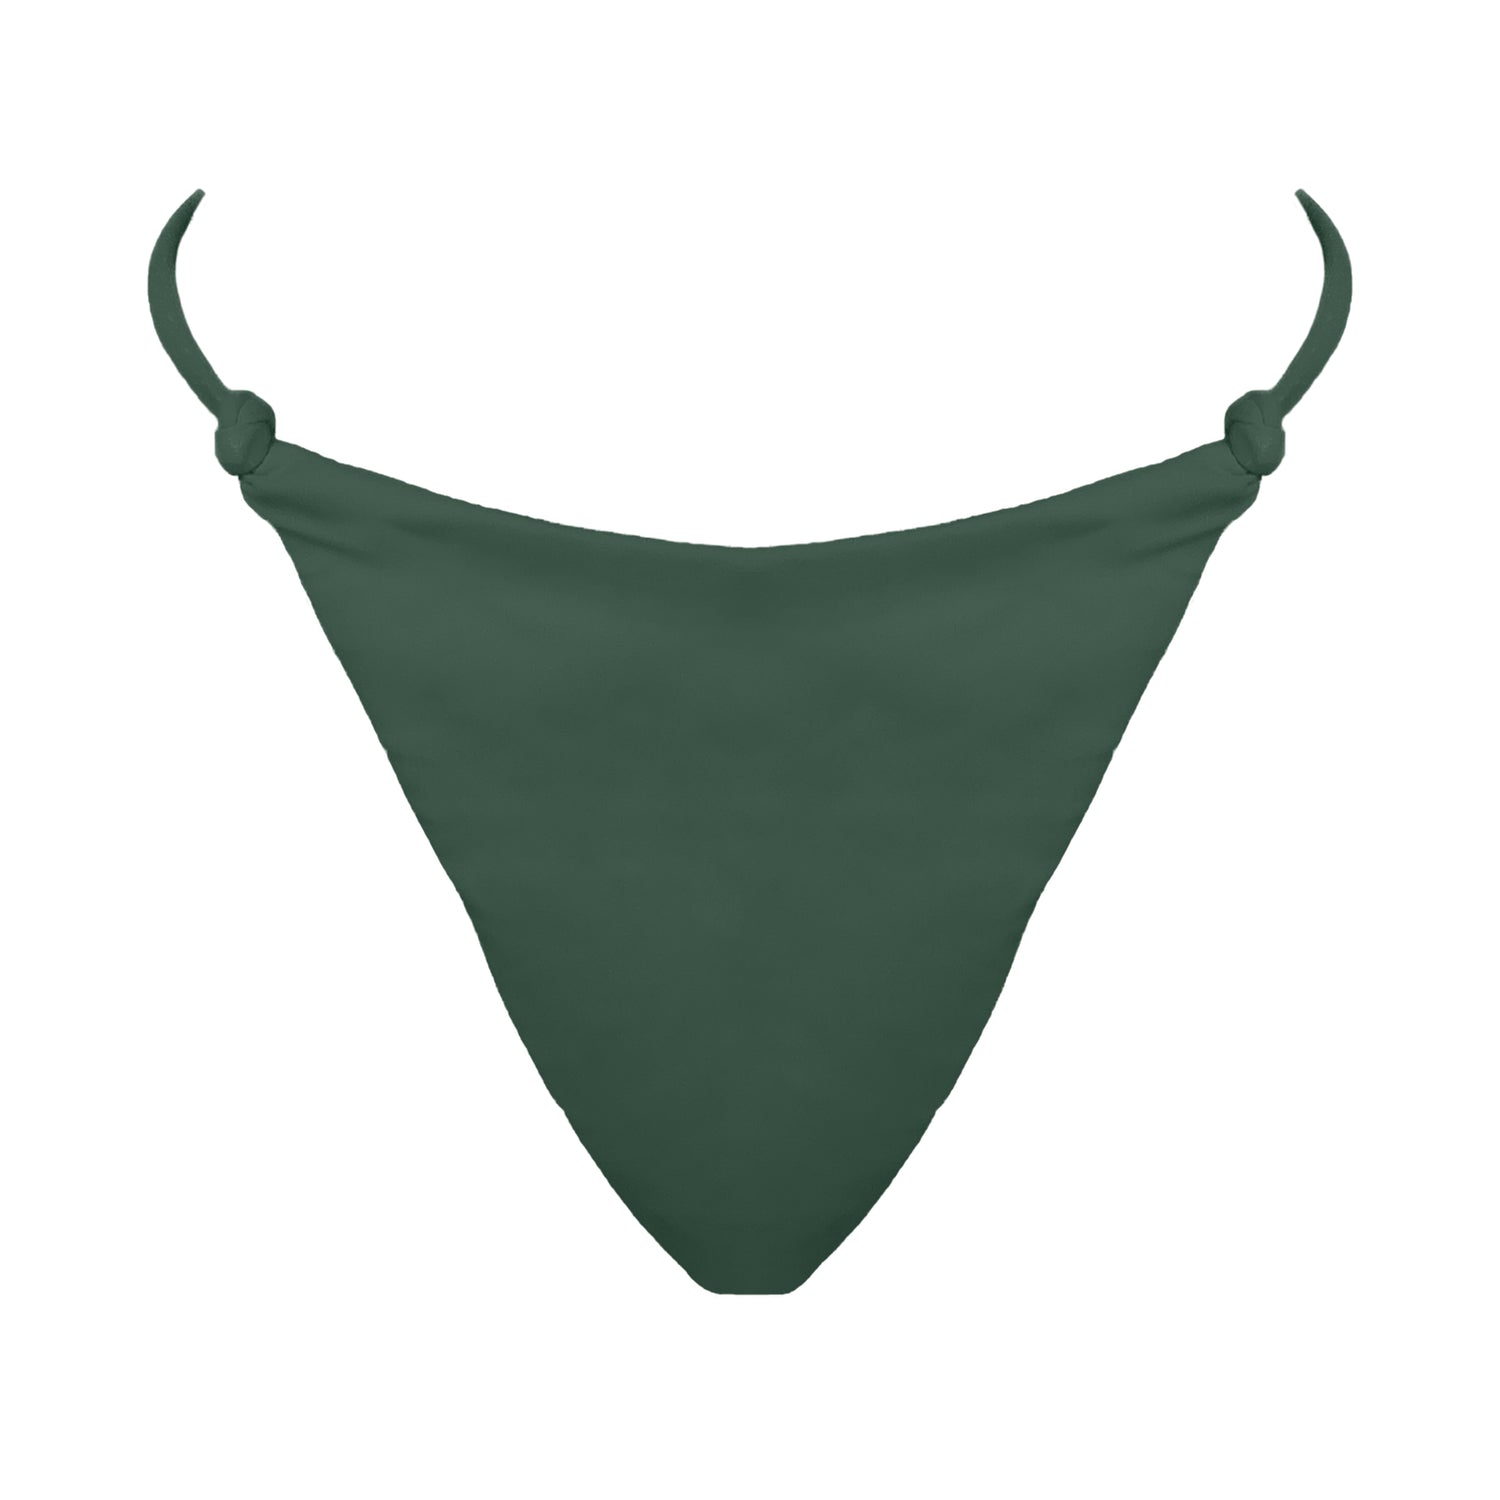 Sage green Skinny side strap mid rise bikini bottom with tie knot details, high cut sides and cheeky coverage.